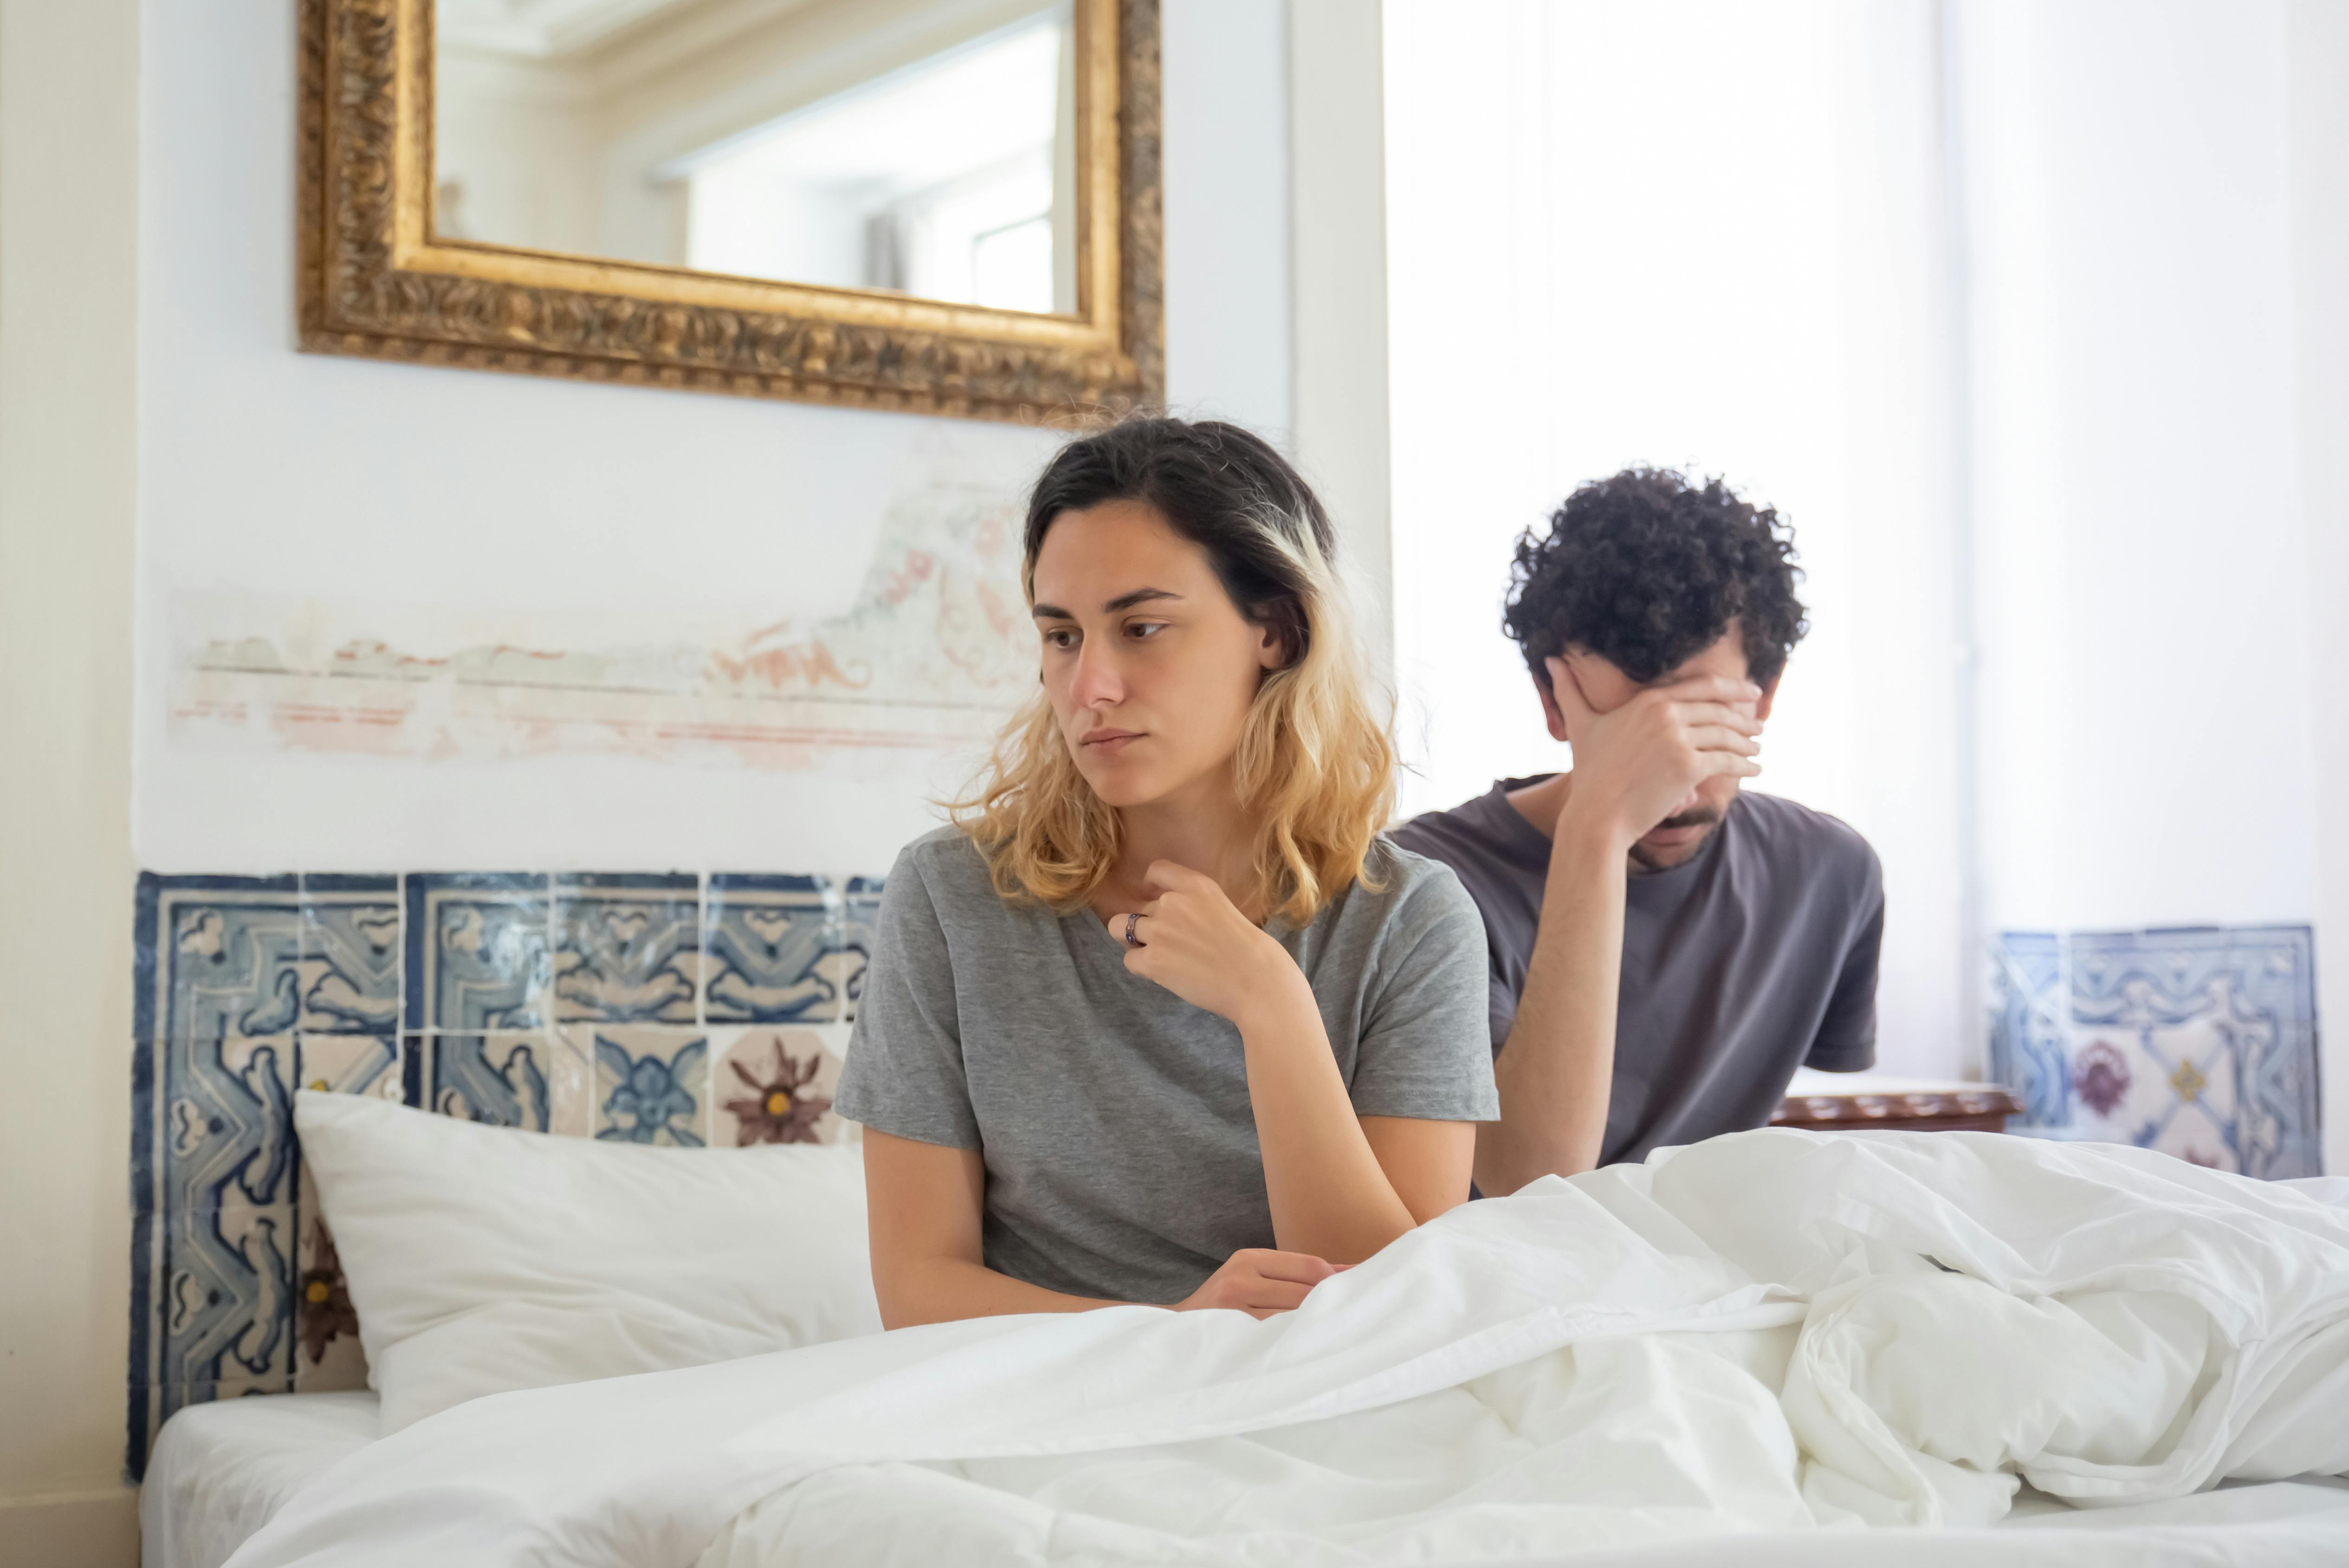 A disgruntled woman in bed with an upset man | Source: Pexels